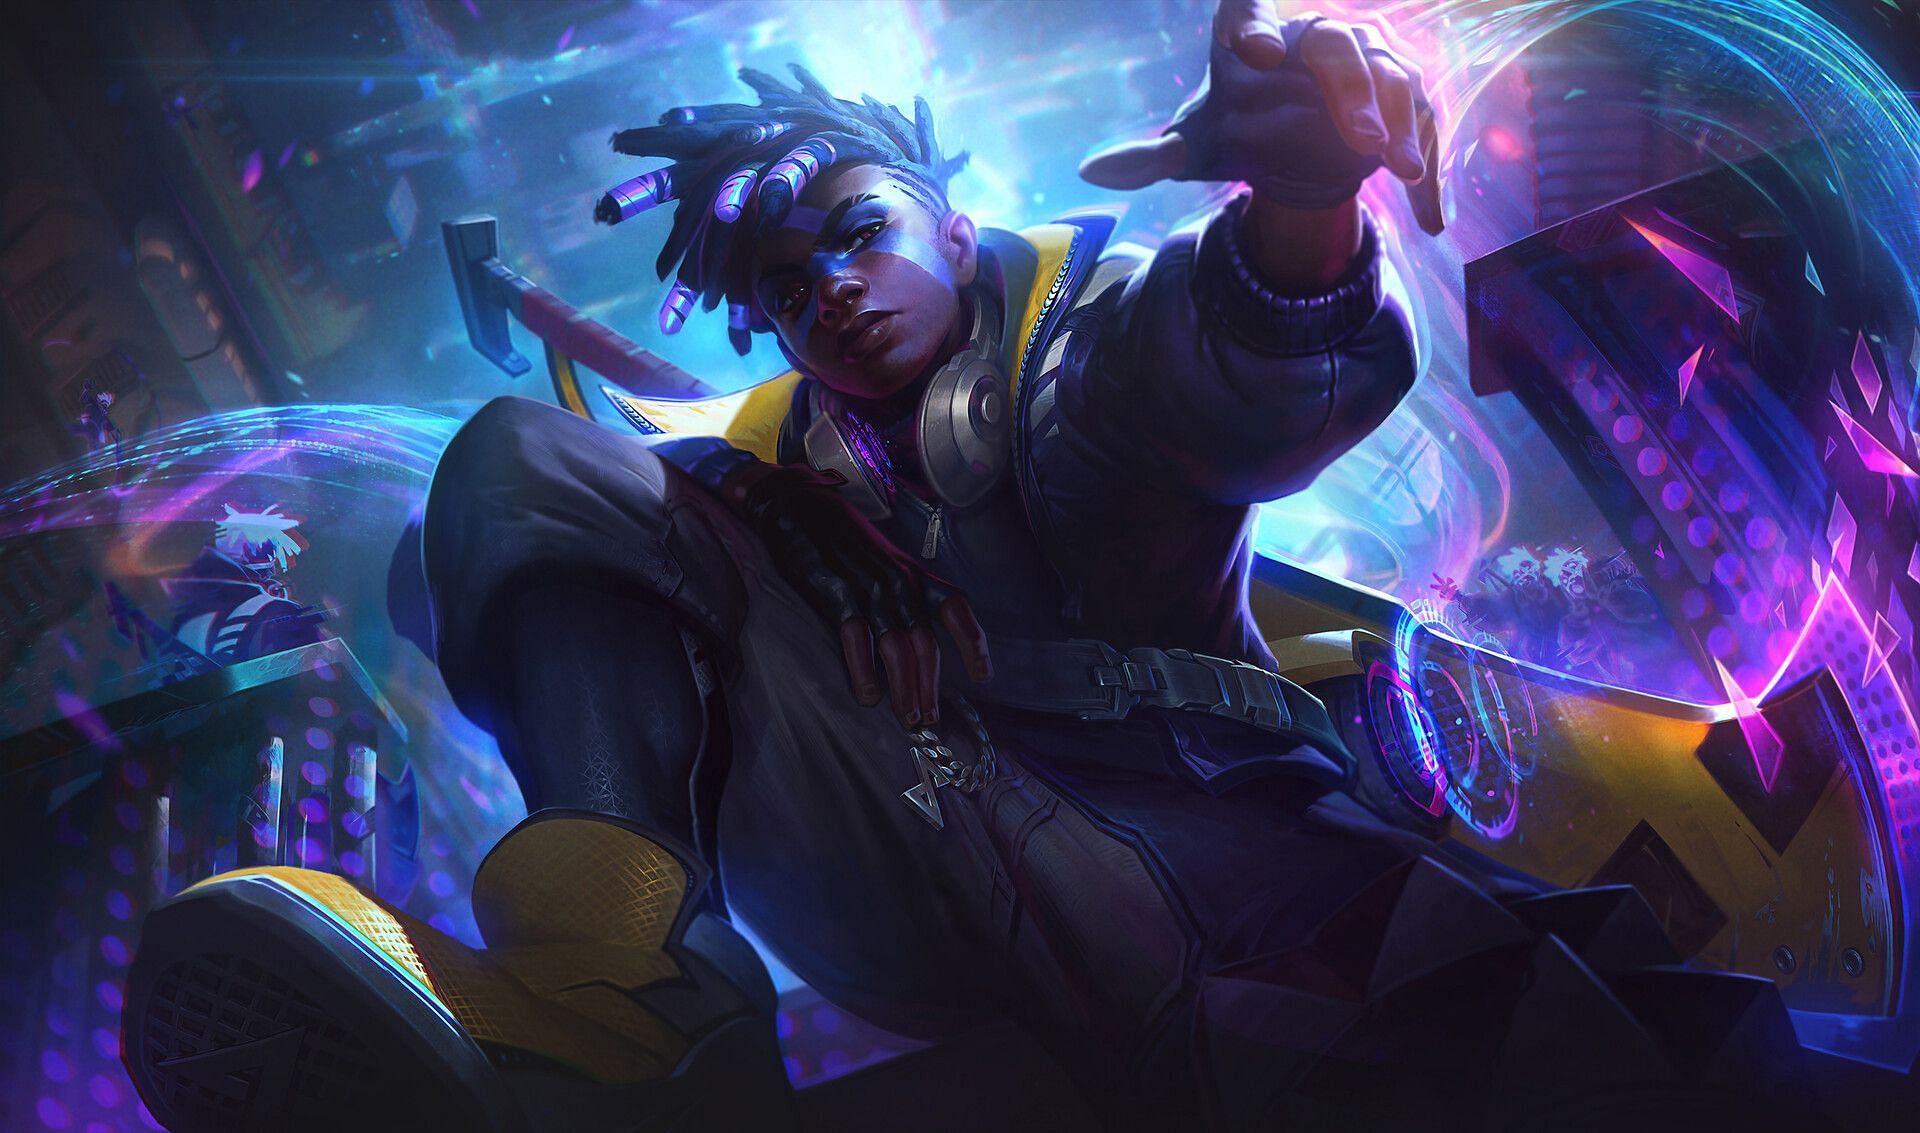 Splash art for Champion Ekko as seen in the League of Legends video game. (Image via Riot Games)